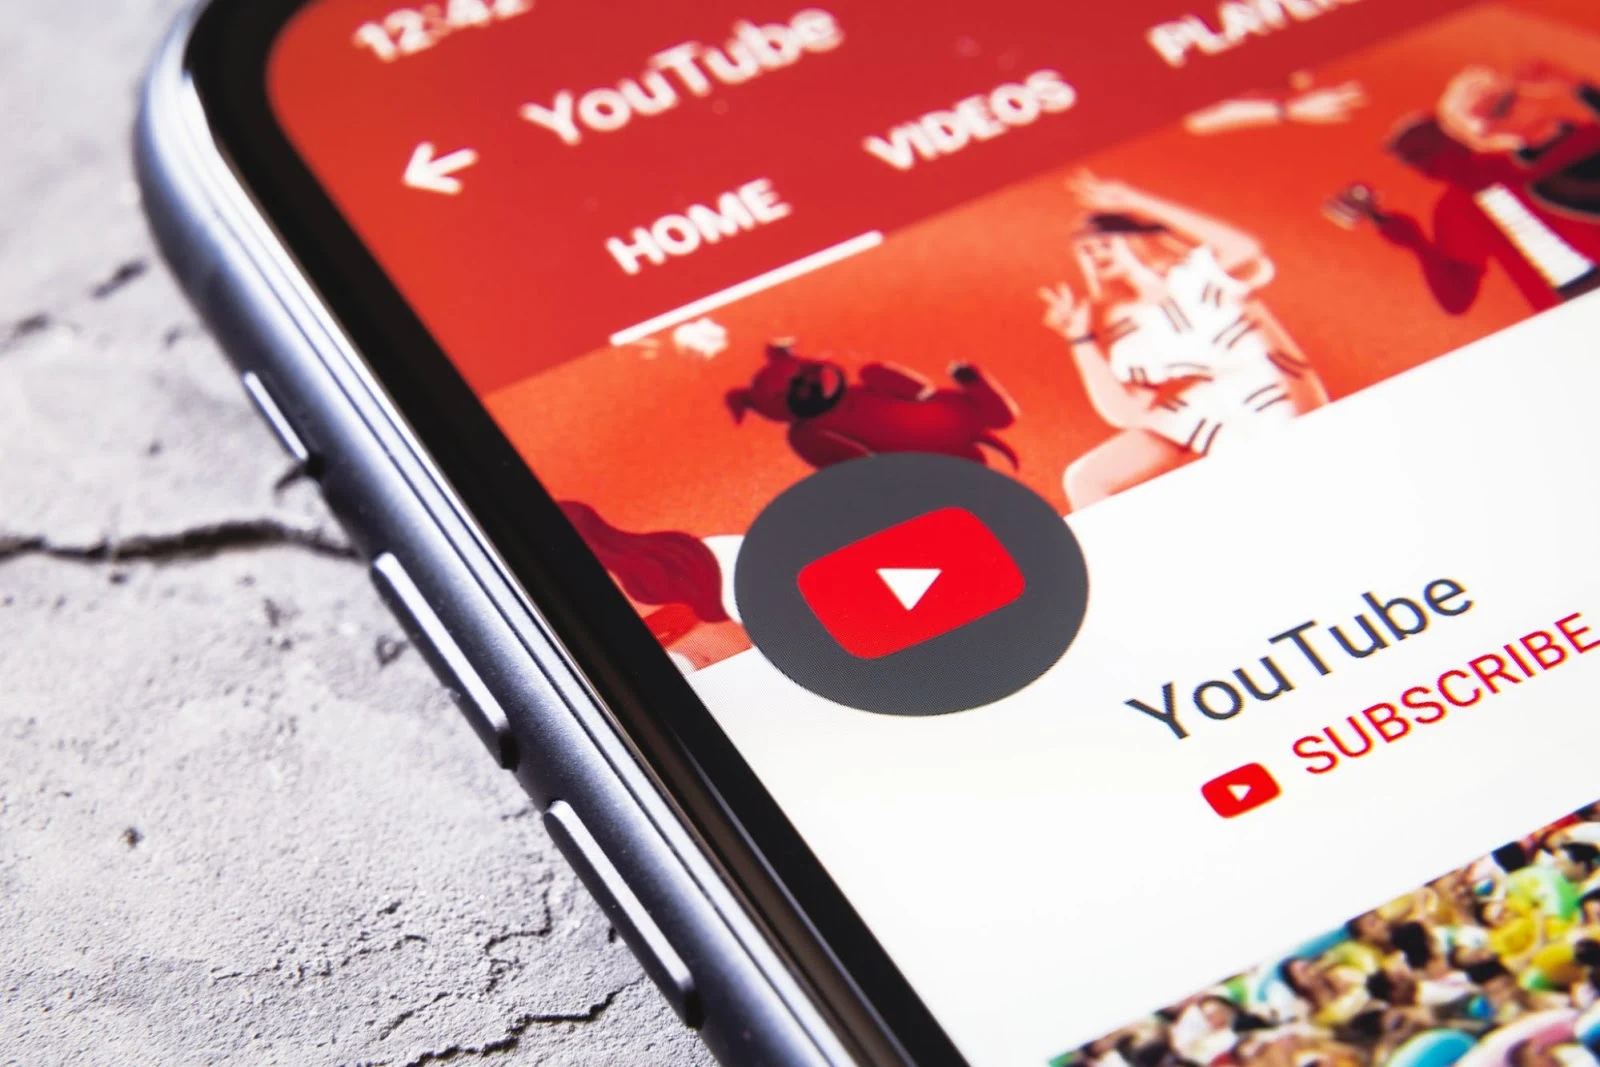 Google Refreshes Its Ios Youtube Application, the Main Update to One of Its Significant Ios Applications Since December